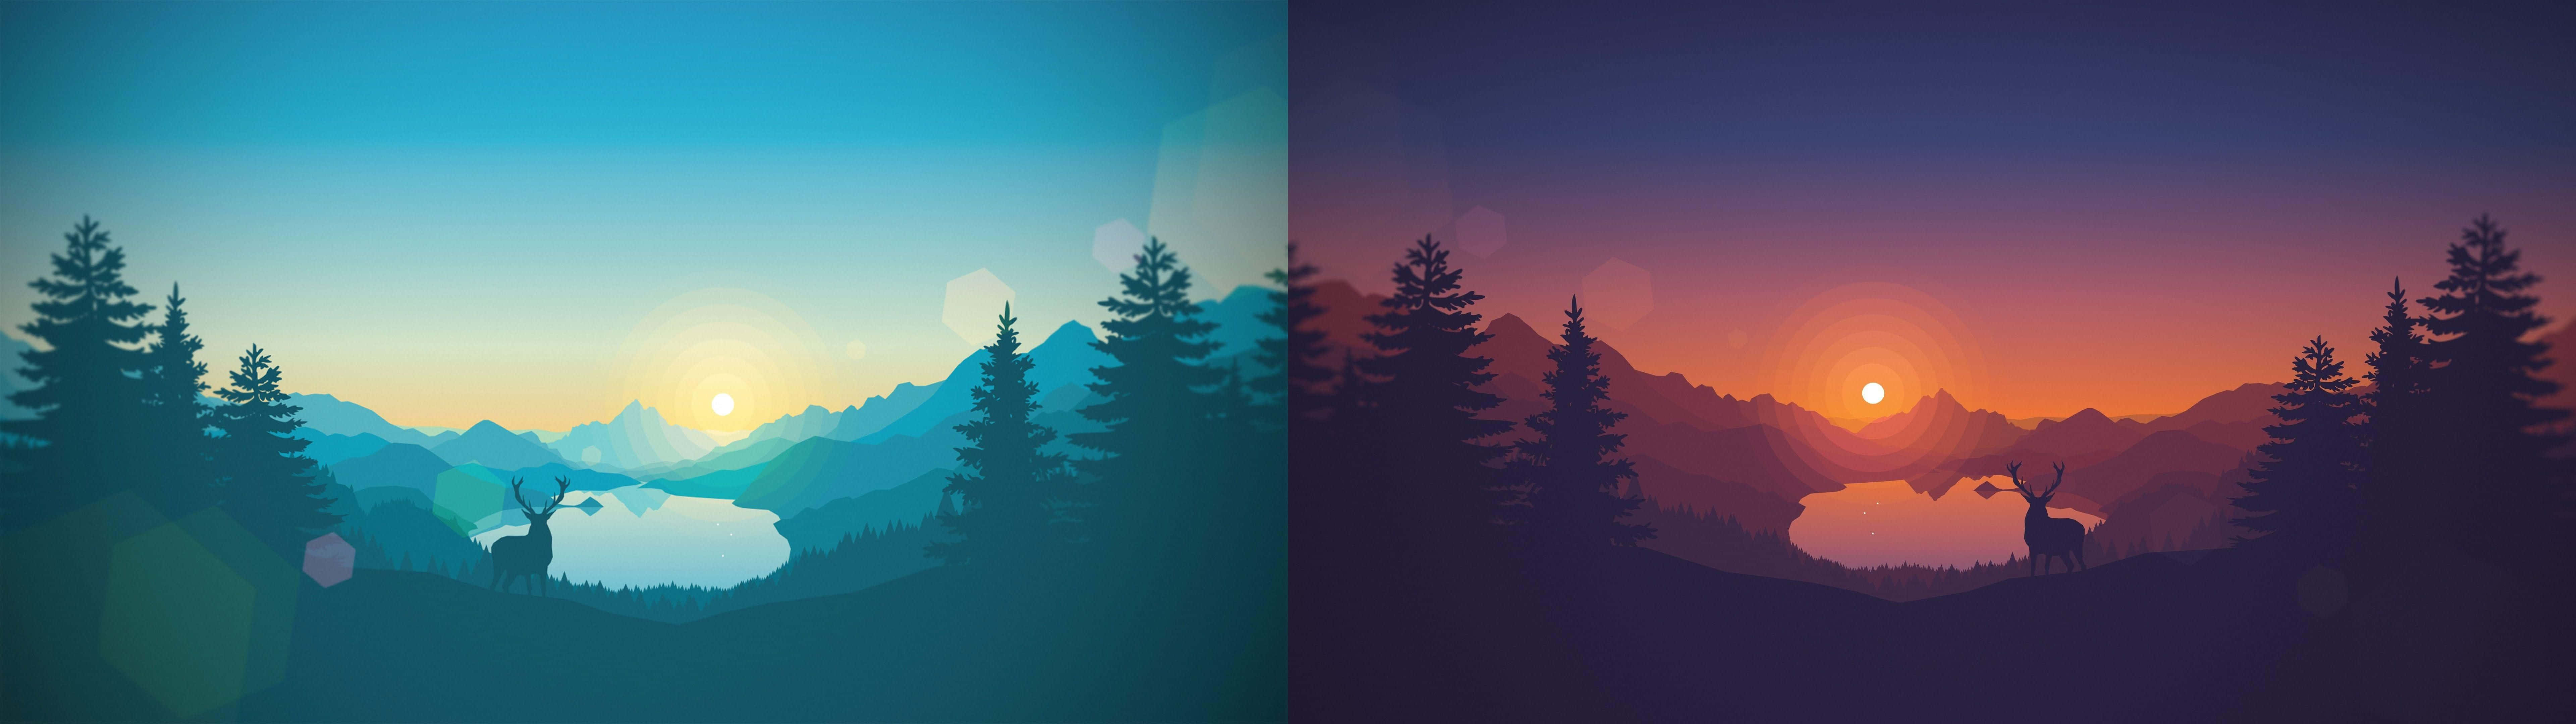 Two Different Images Of A Sunset With Trees And Mountains Wallpaper